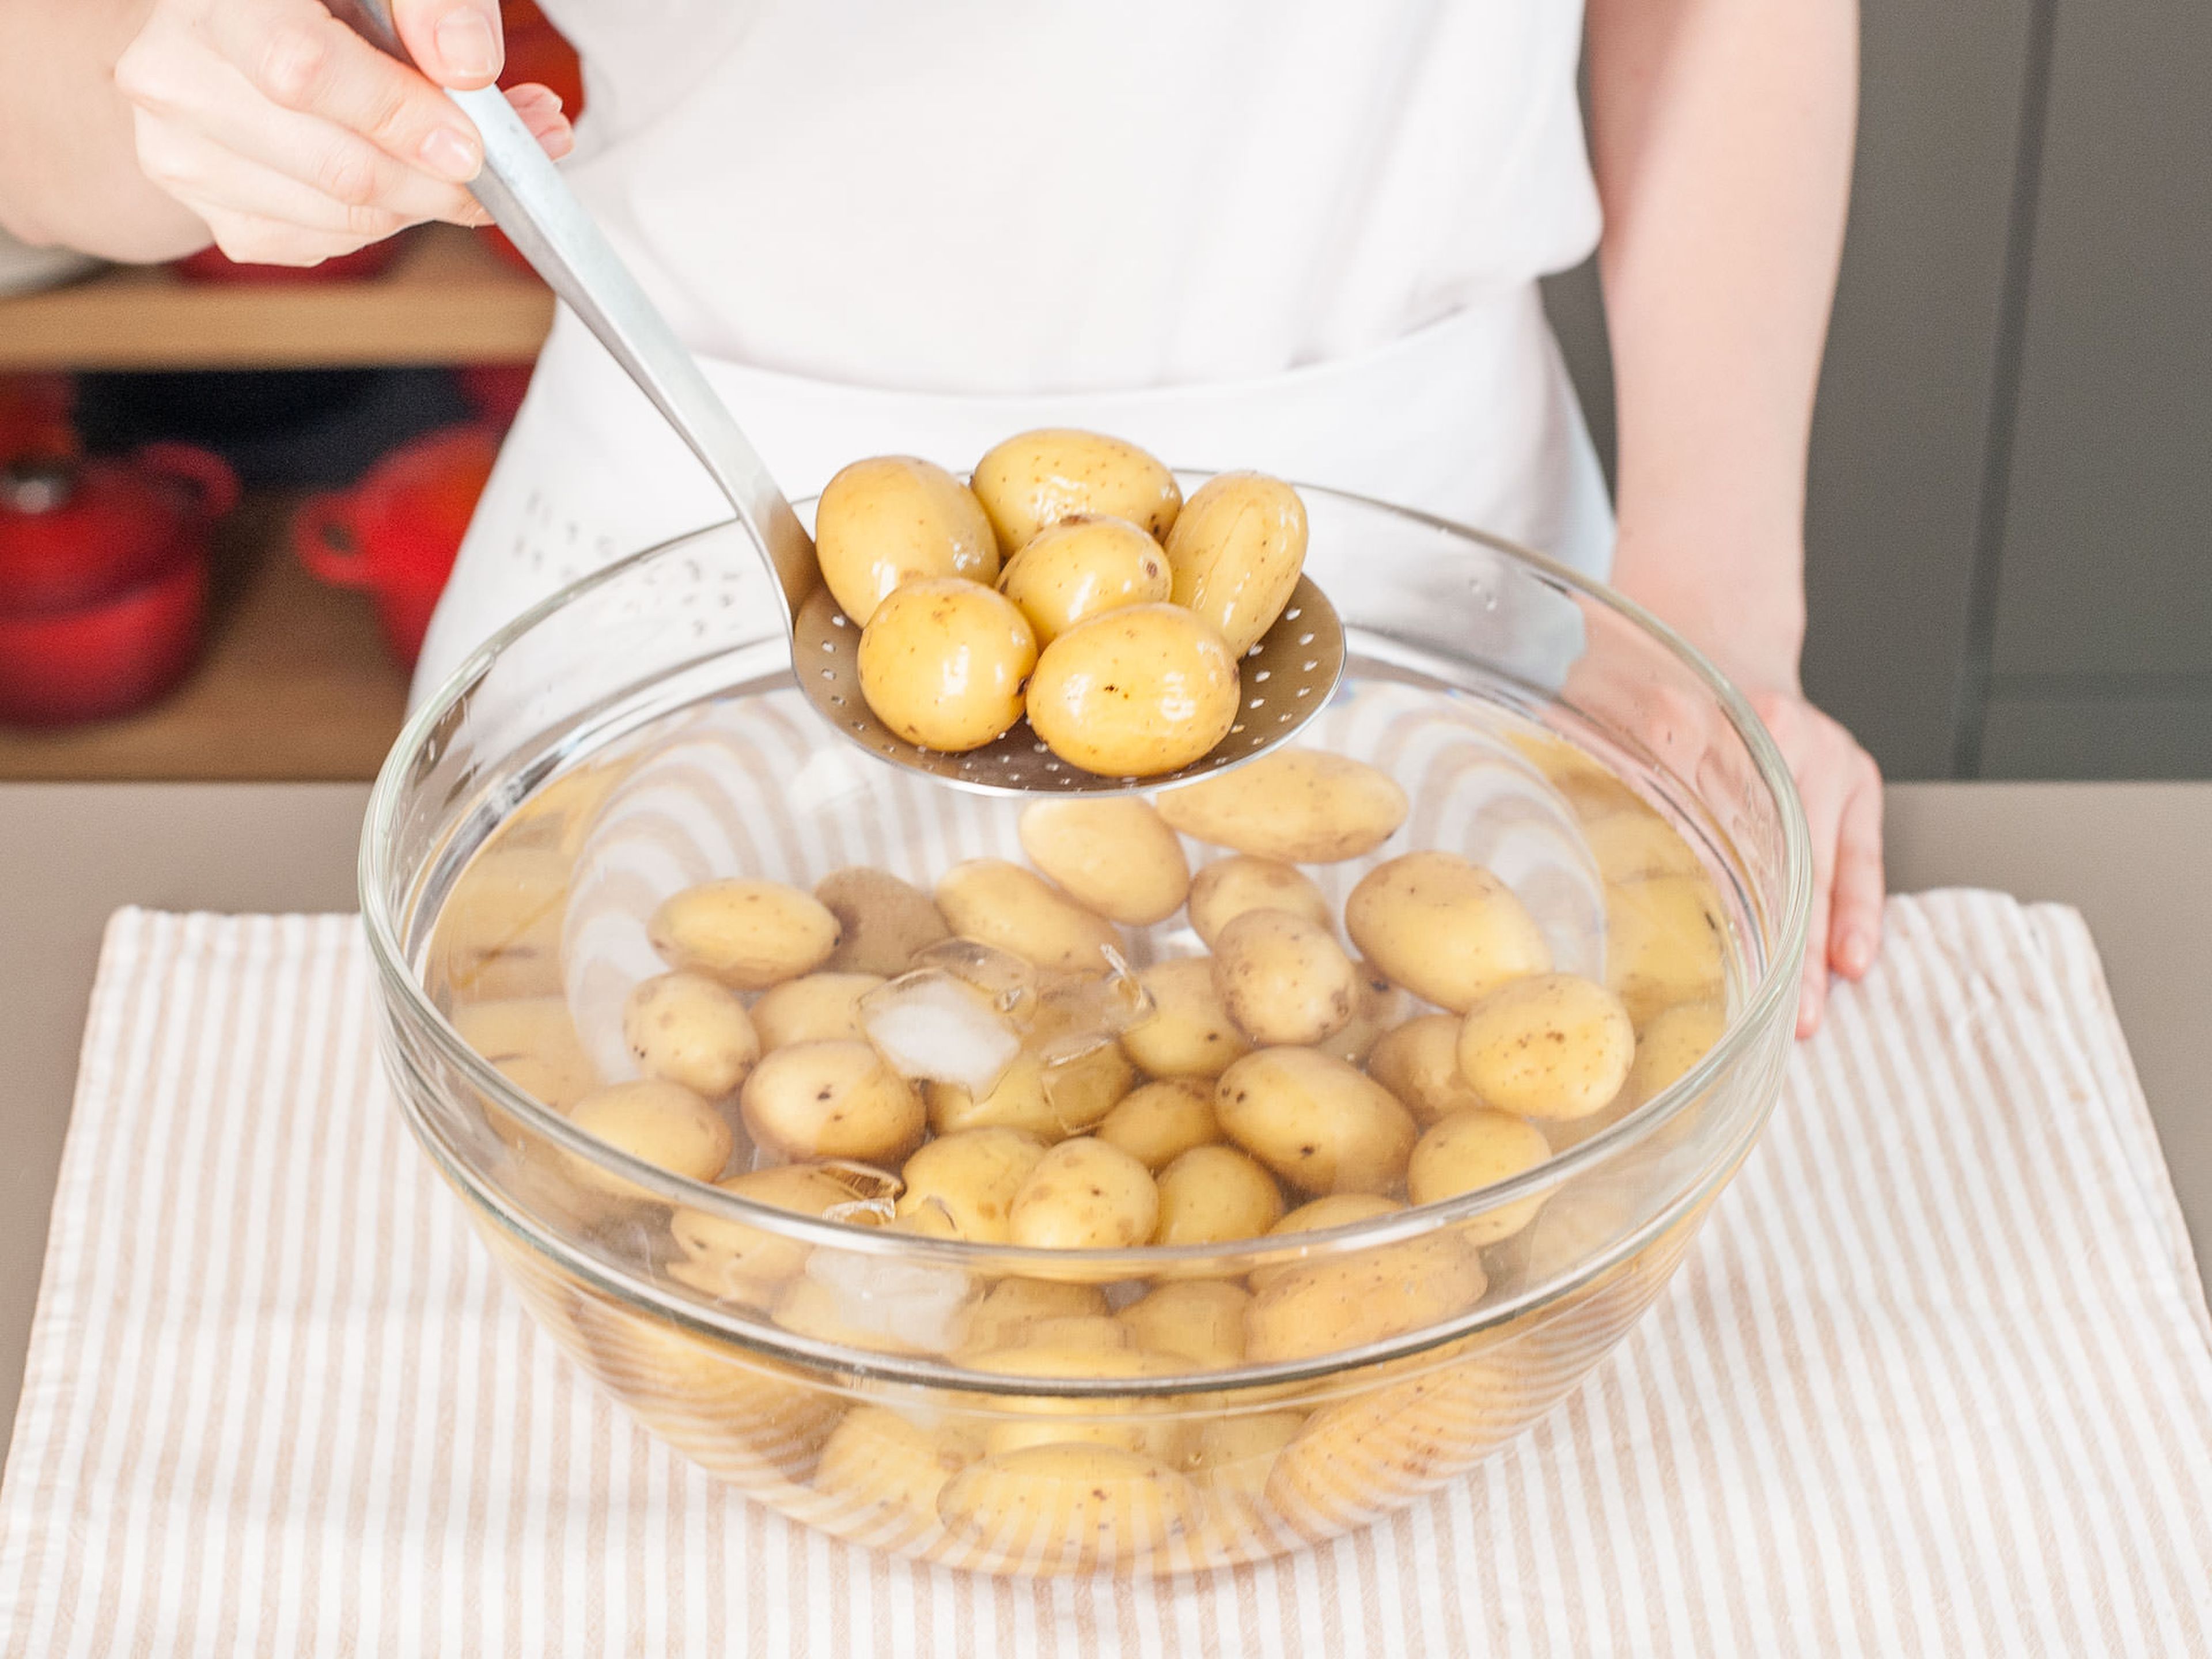 Boil potatoes in salted water until tender. Transfer them to ice bath to chill for a few minutes, then drain and pat dry. Halve or quarter potatoes (depending on size) and place in a large bowl.